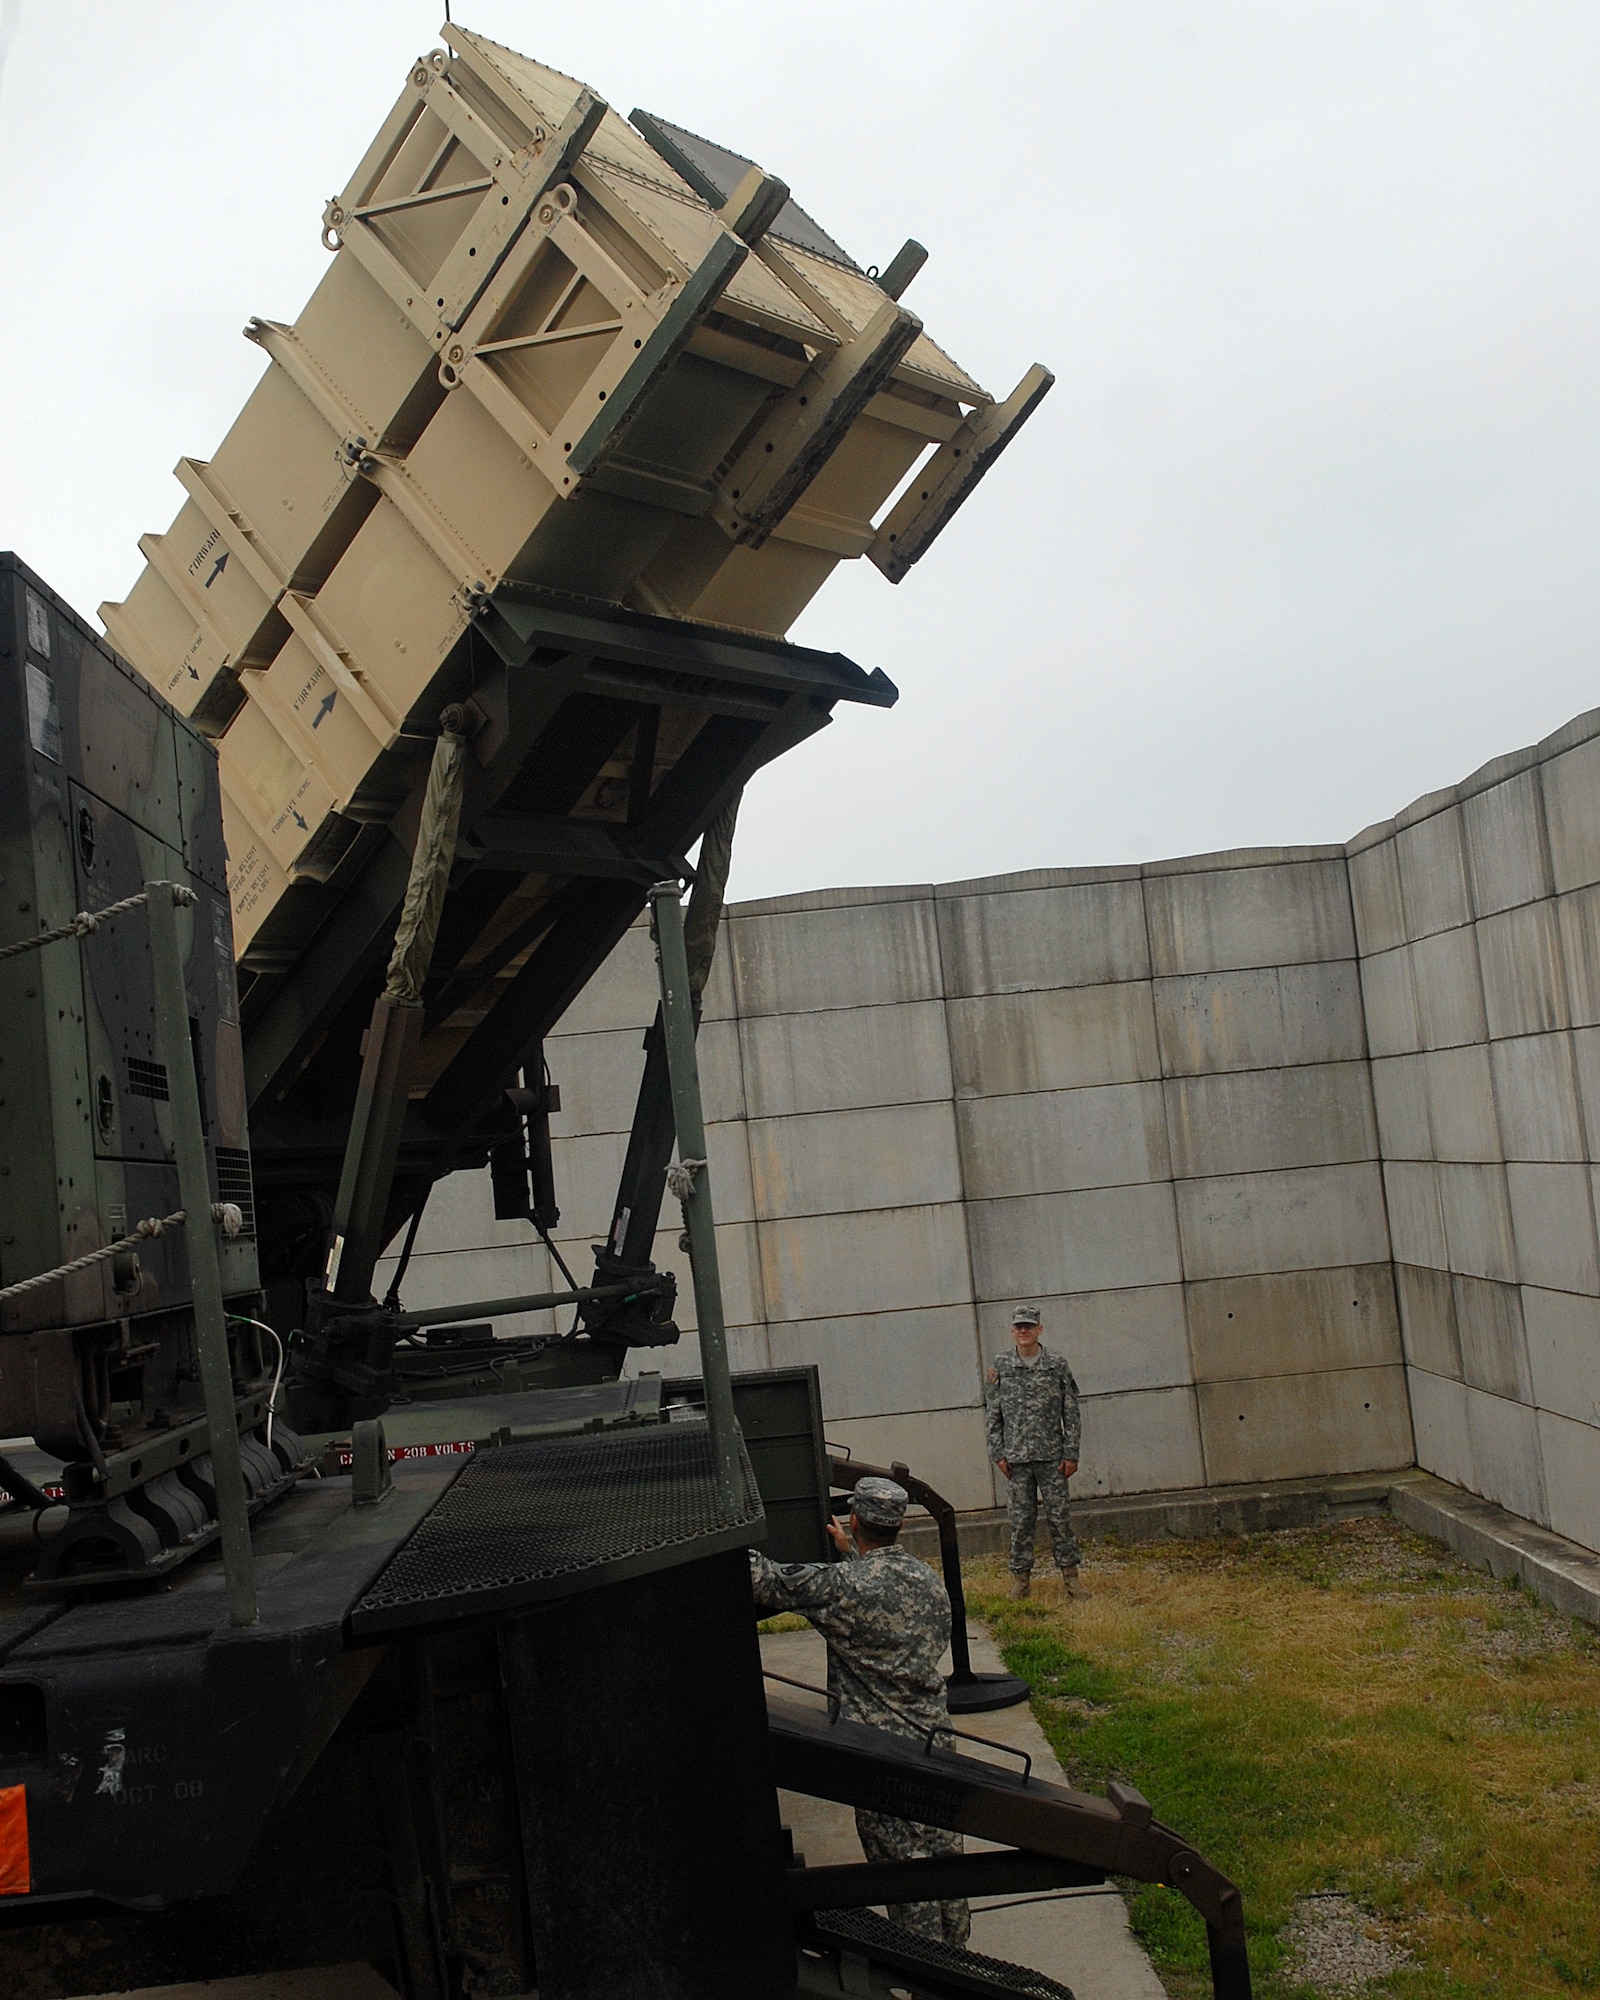 KUNSAN AIR BASE, Republic of Korea -- Private 1st Class Andrew Quintana, 2-1 Air Defense Artillery Alpha Battery patriot operator, rotates the Patriot Advanced Capability Launcher while Private 1st Class Ralph Collins checks for any malfunctions. All over Korea, Patriot Advanced Capability Launchers are used in defense of military installations. (U.S. Air Force photo/ Senior Airman Roy Lynch)